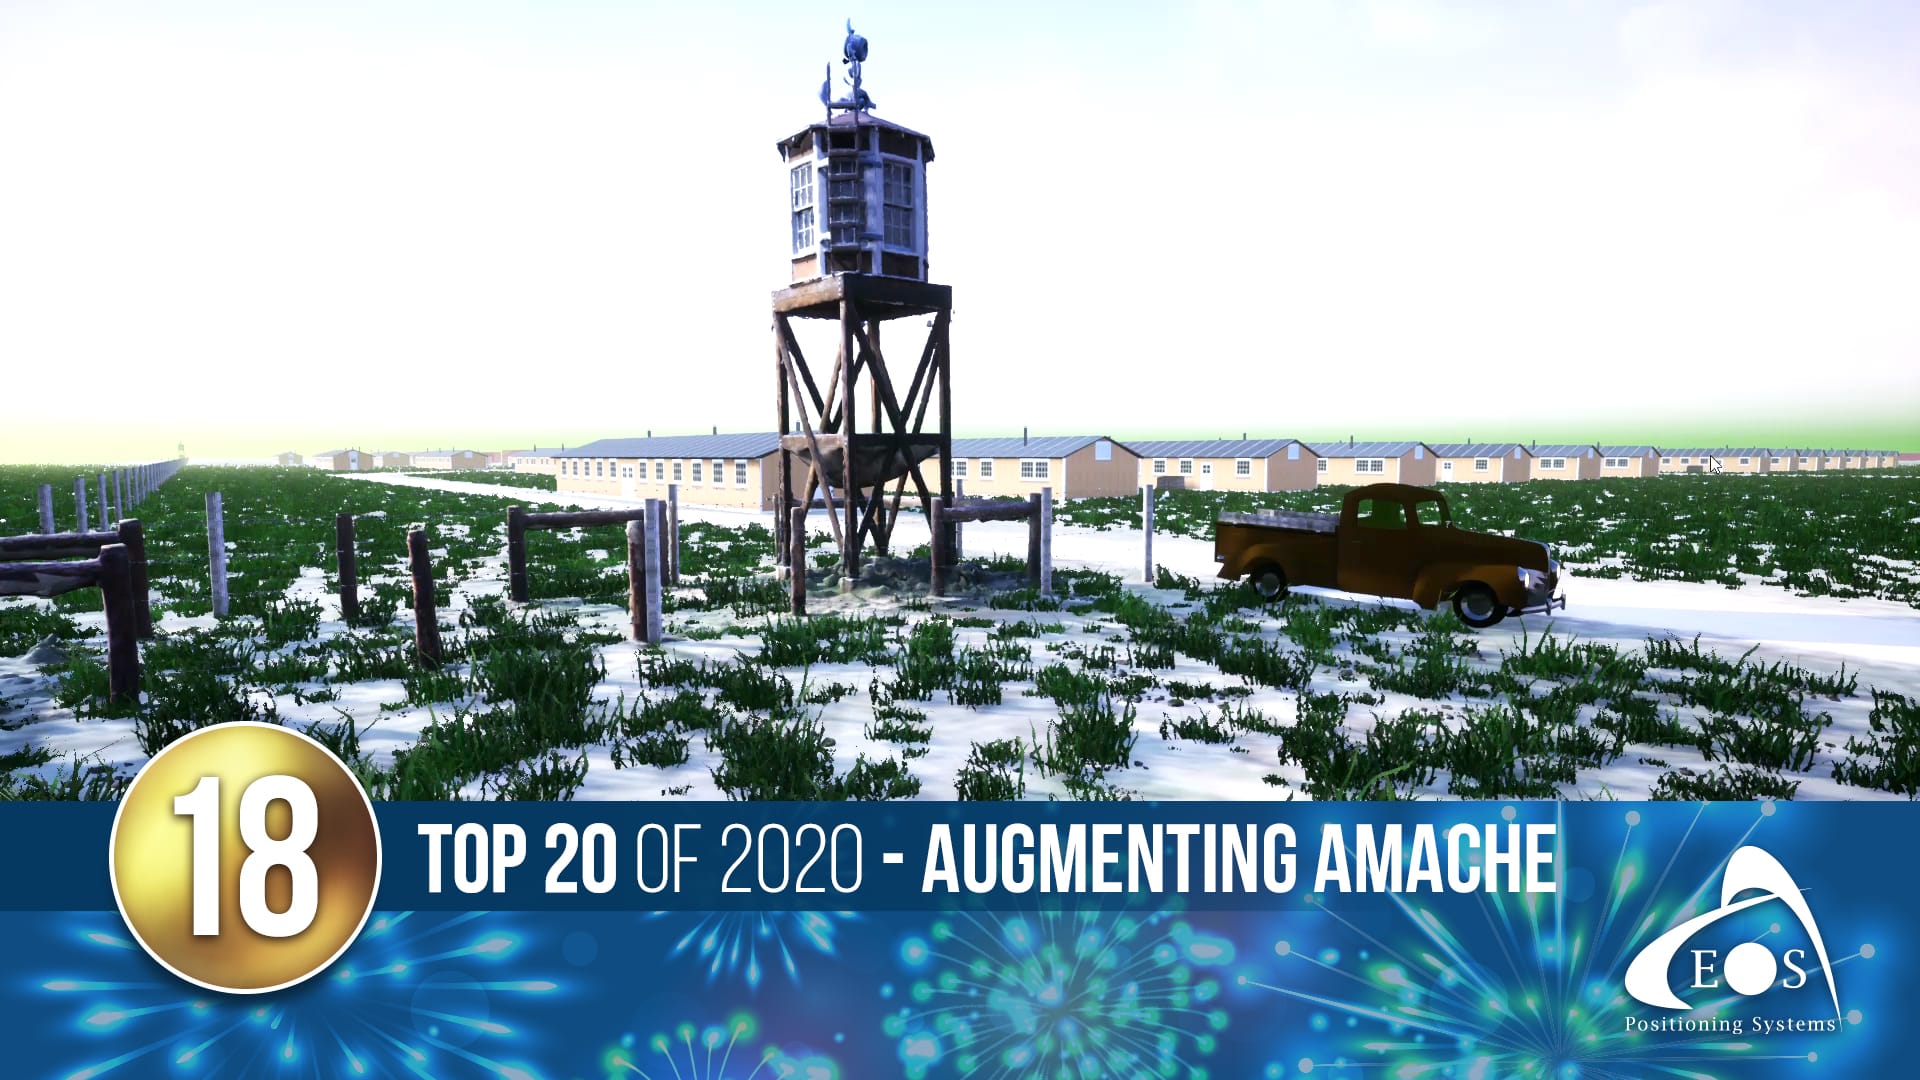 Eos Positioning Systems blog top articles of 2020: 18 - Augmenting Amache